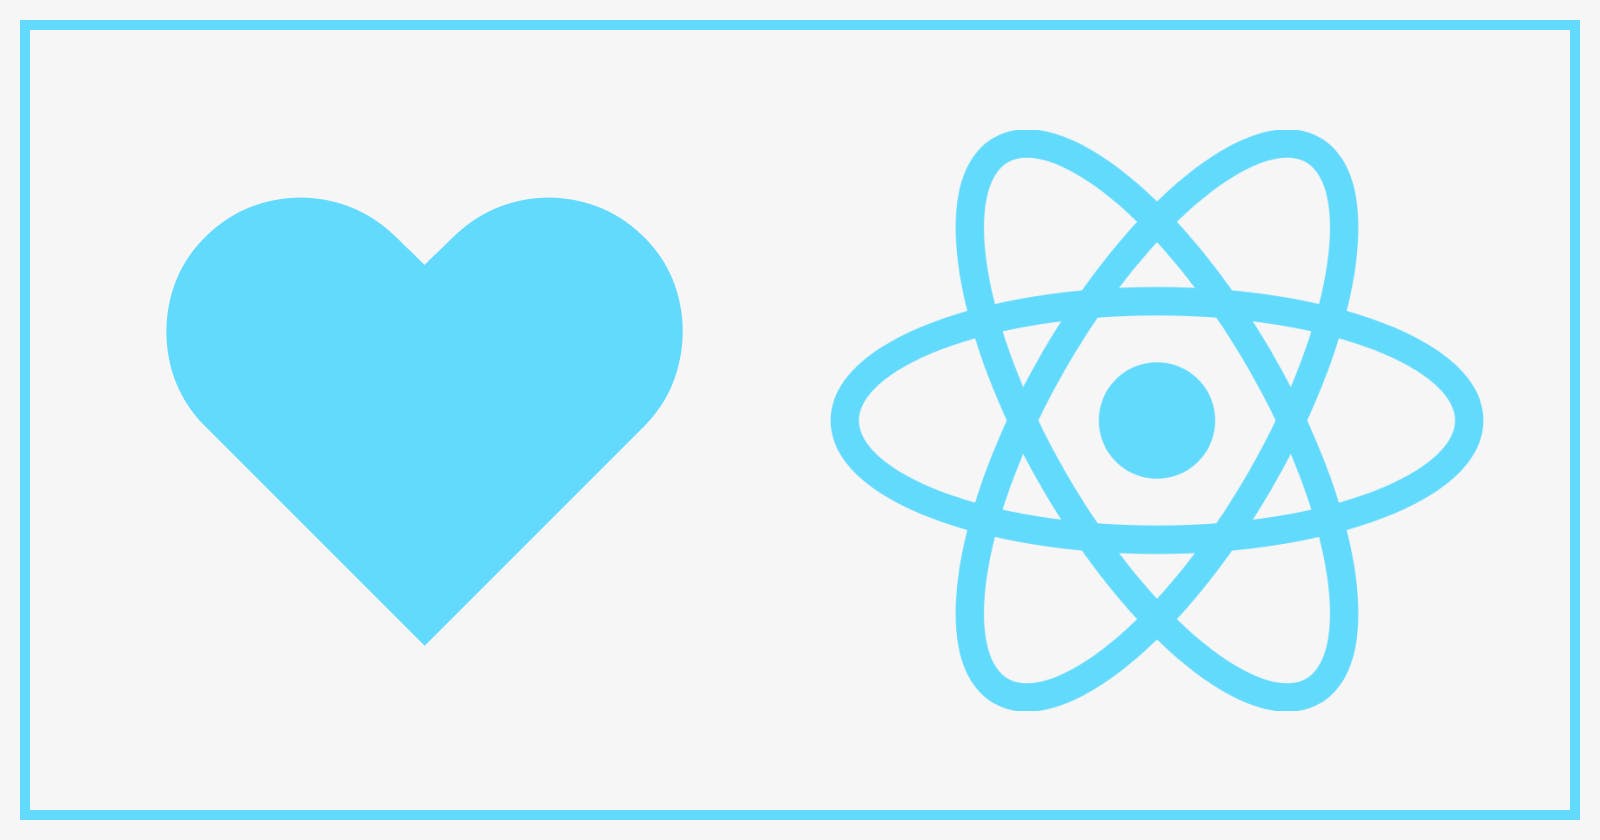 A love letter to React function components